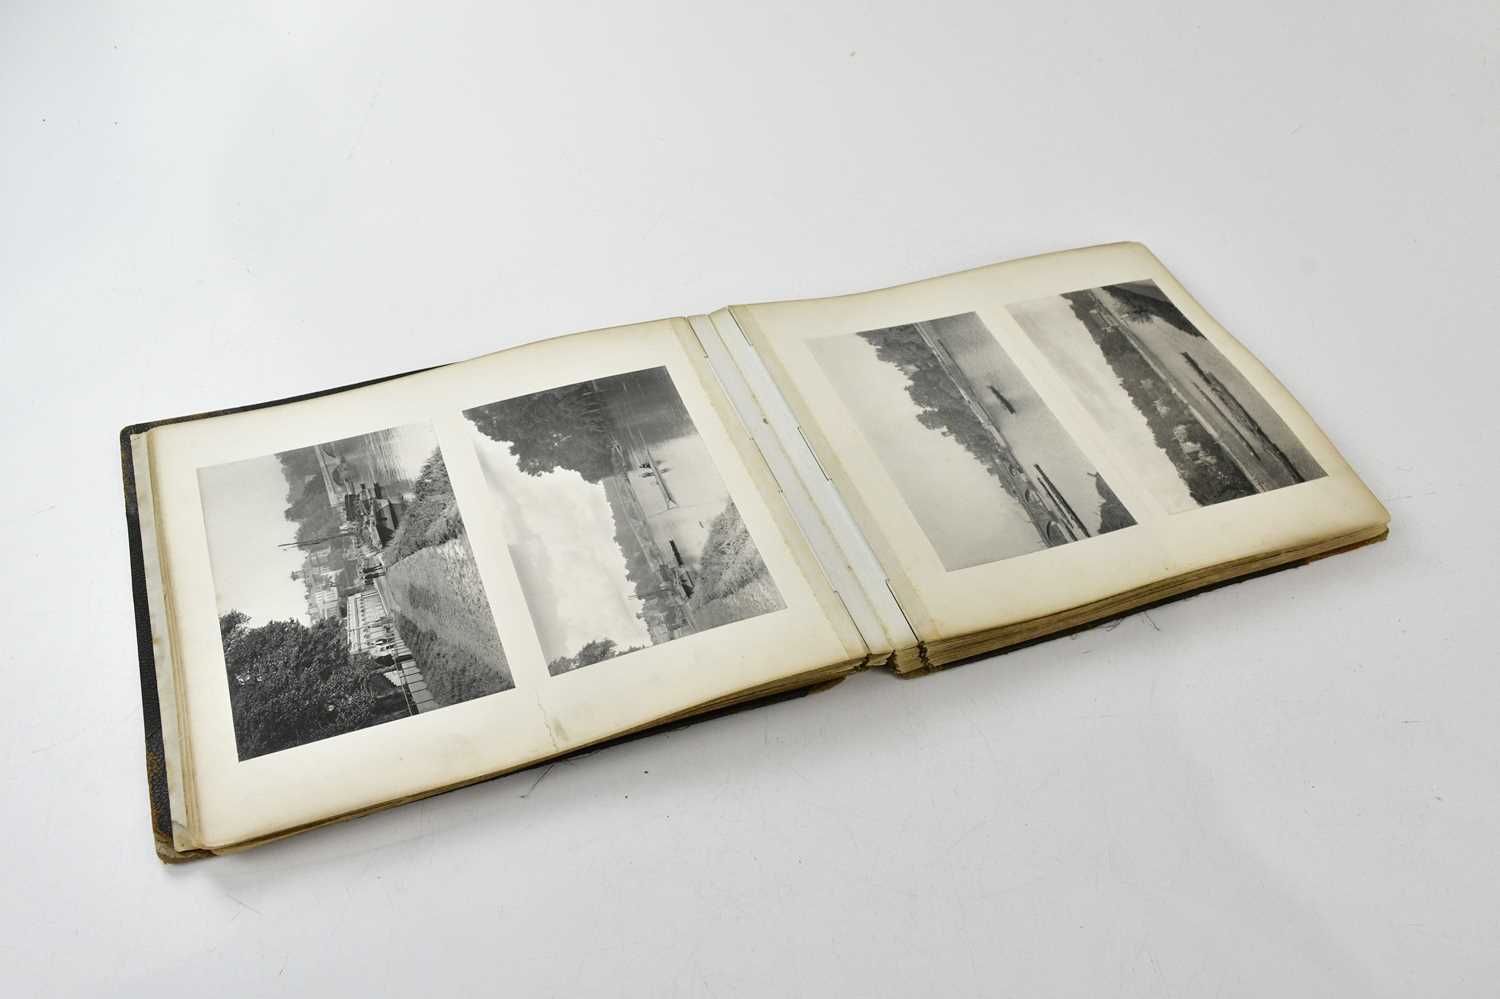 An Edwardian album of photographs, to include views of London, winter scenes possibly in America, - Image 2 of 4